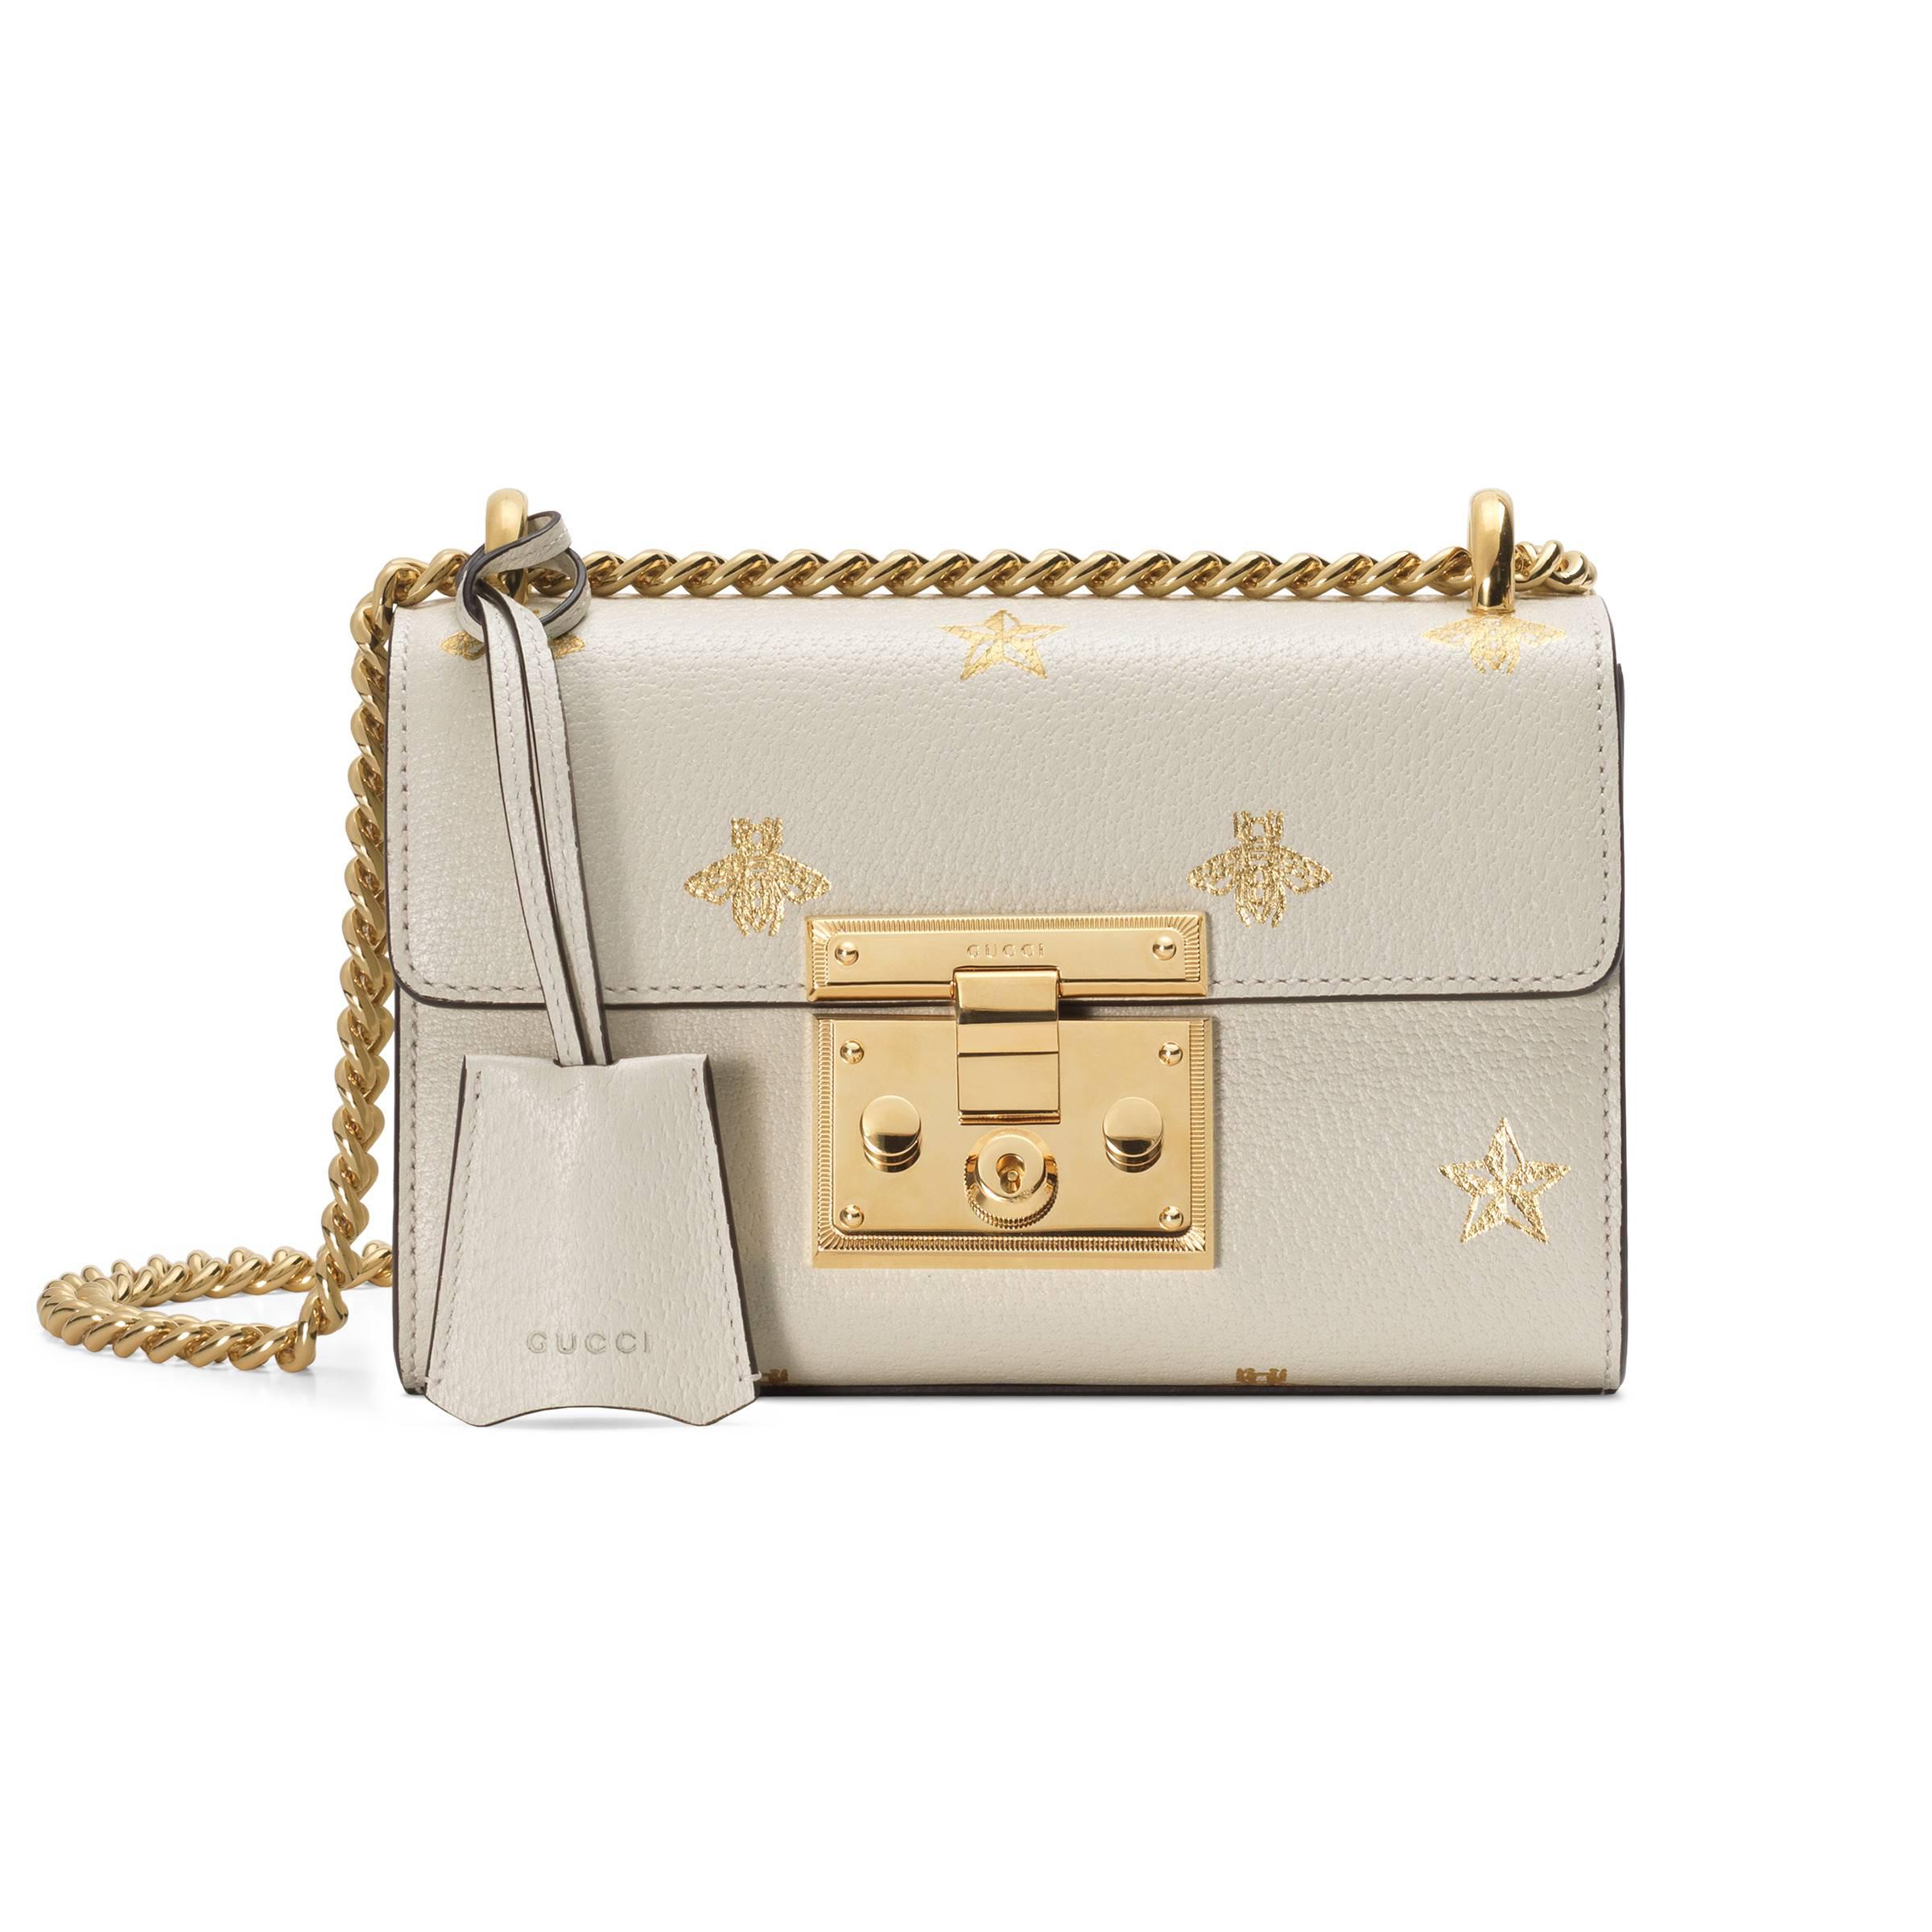 Gucci Leather Padlock Bee Star Small Shoulder Bag in White Leather (White) - Lyst